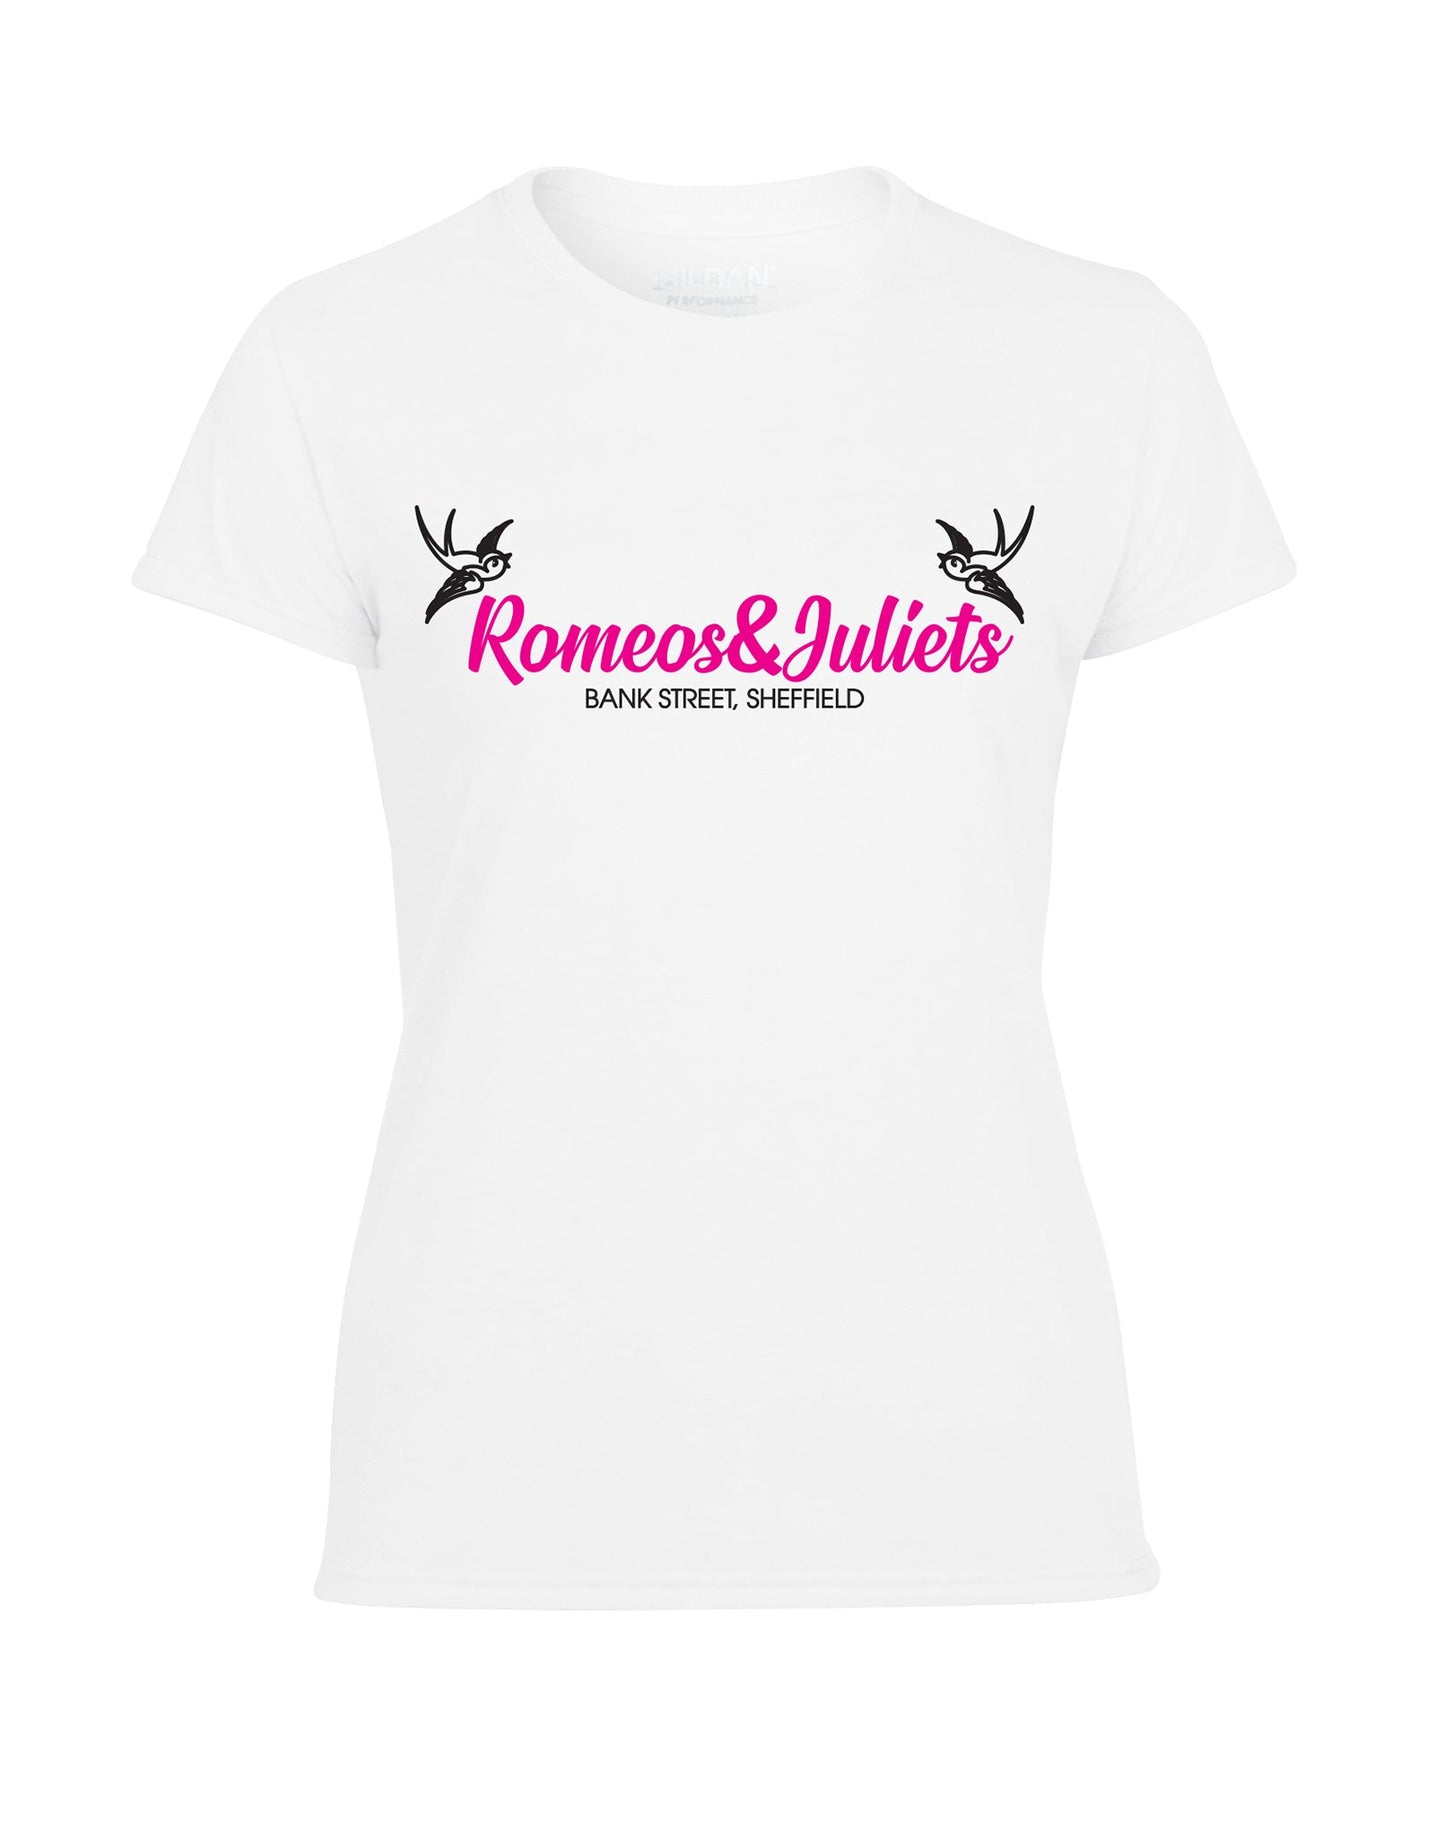 Romeos & Juliets ladies fit t-shirt- various colours - Dirty Stop Outs